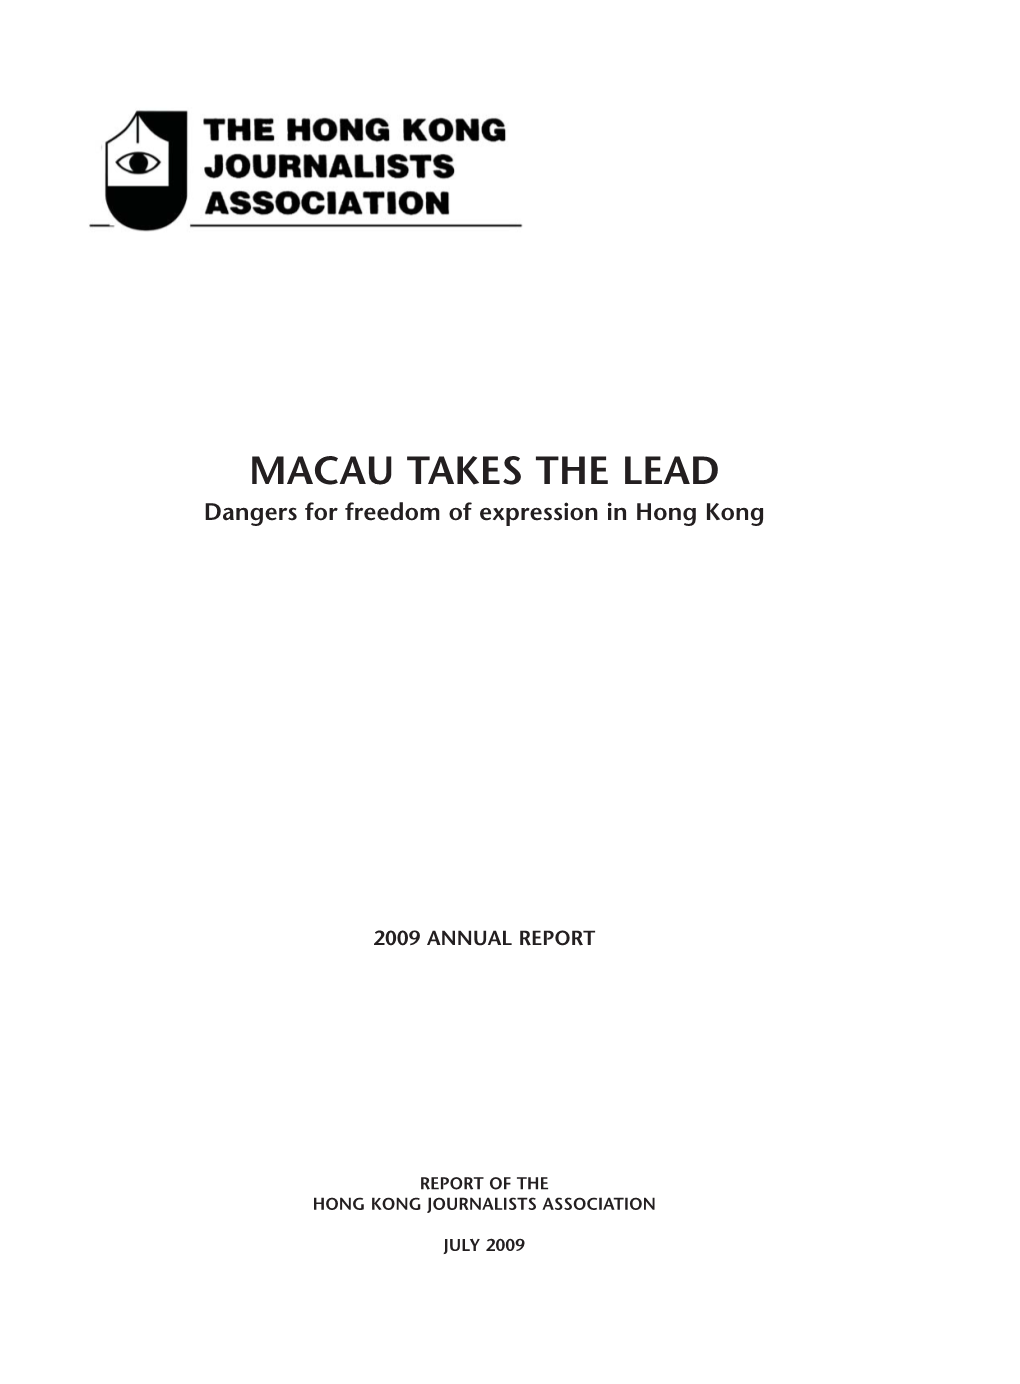 MACAU TAKES the LEAD Dangers for Freedom of Expression in Hong Kong